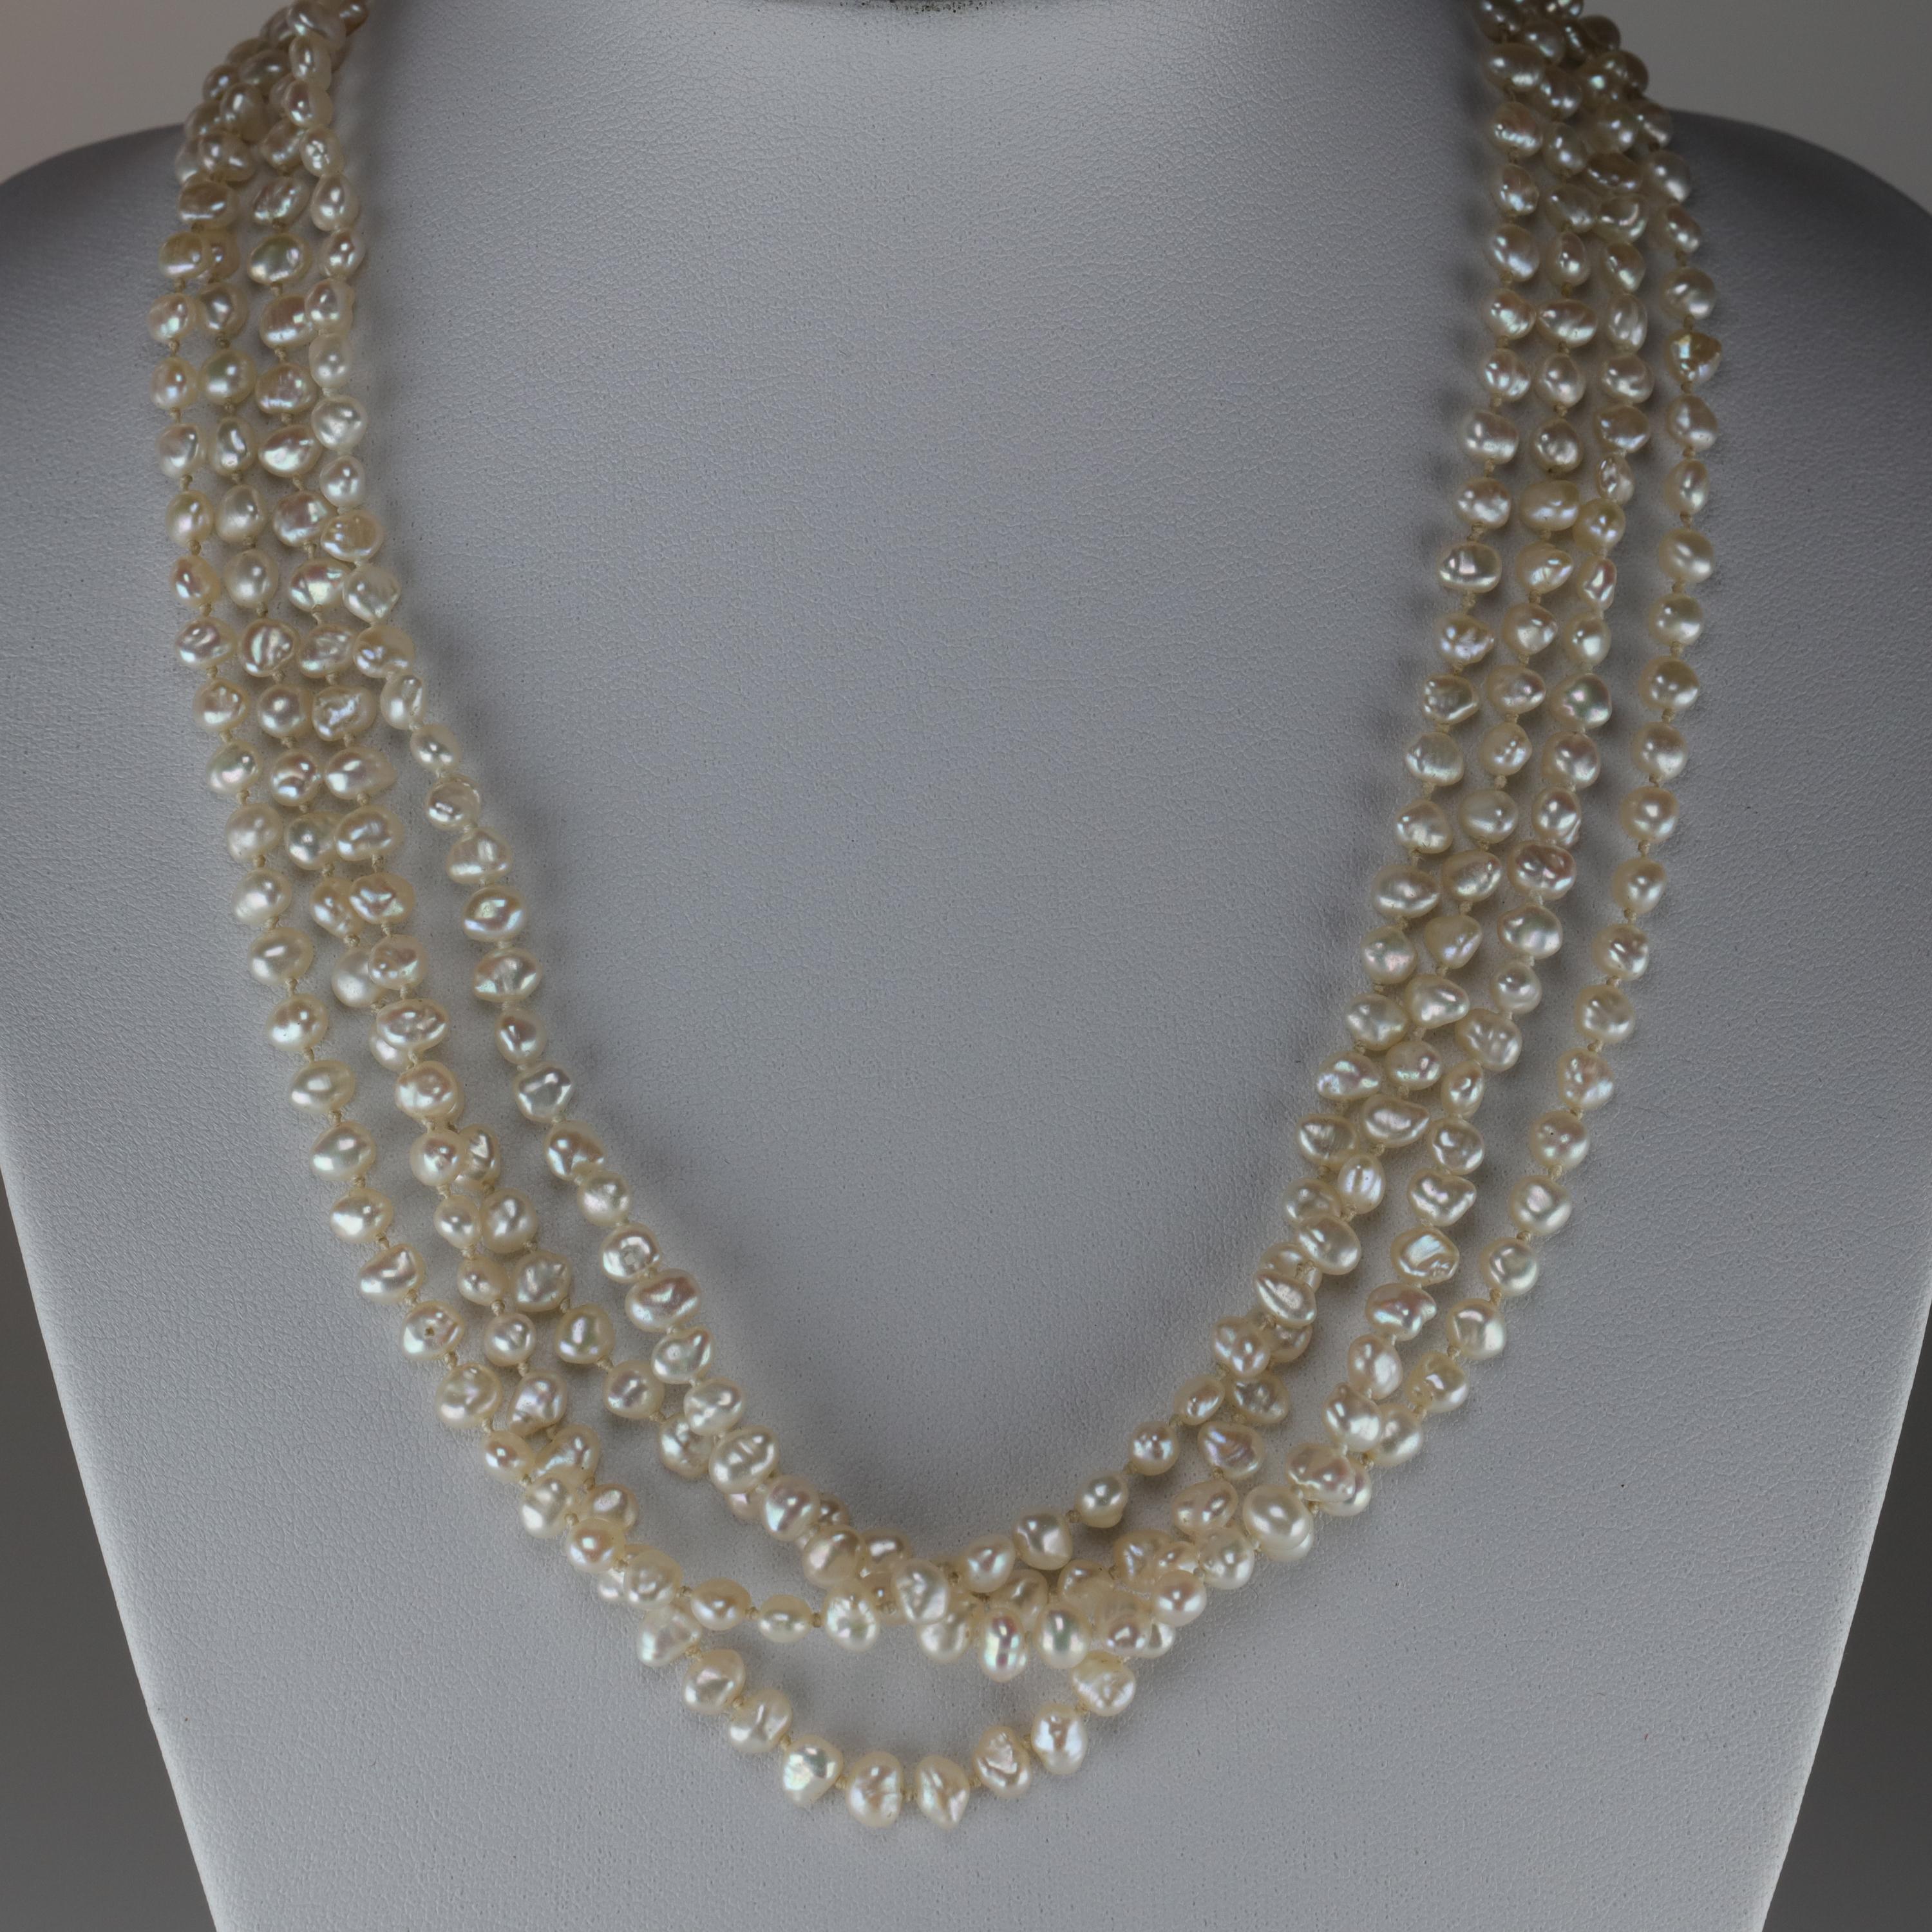 Gump's Pearl and Opal Necklace Features Rare & Authentic Biwa Pearls 7